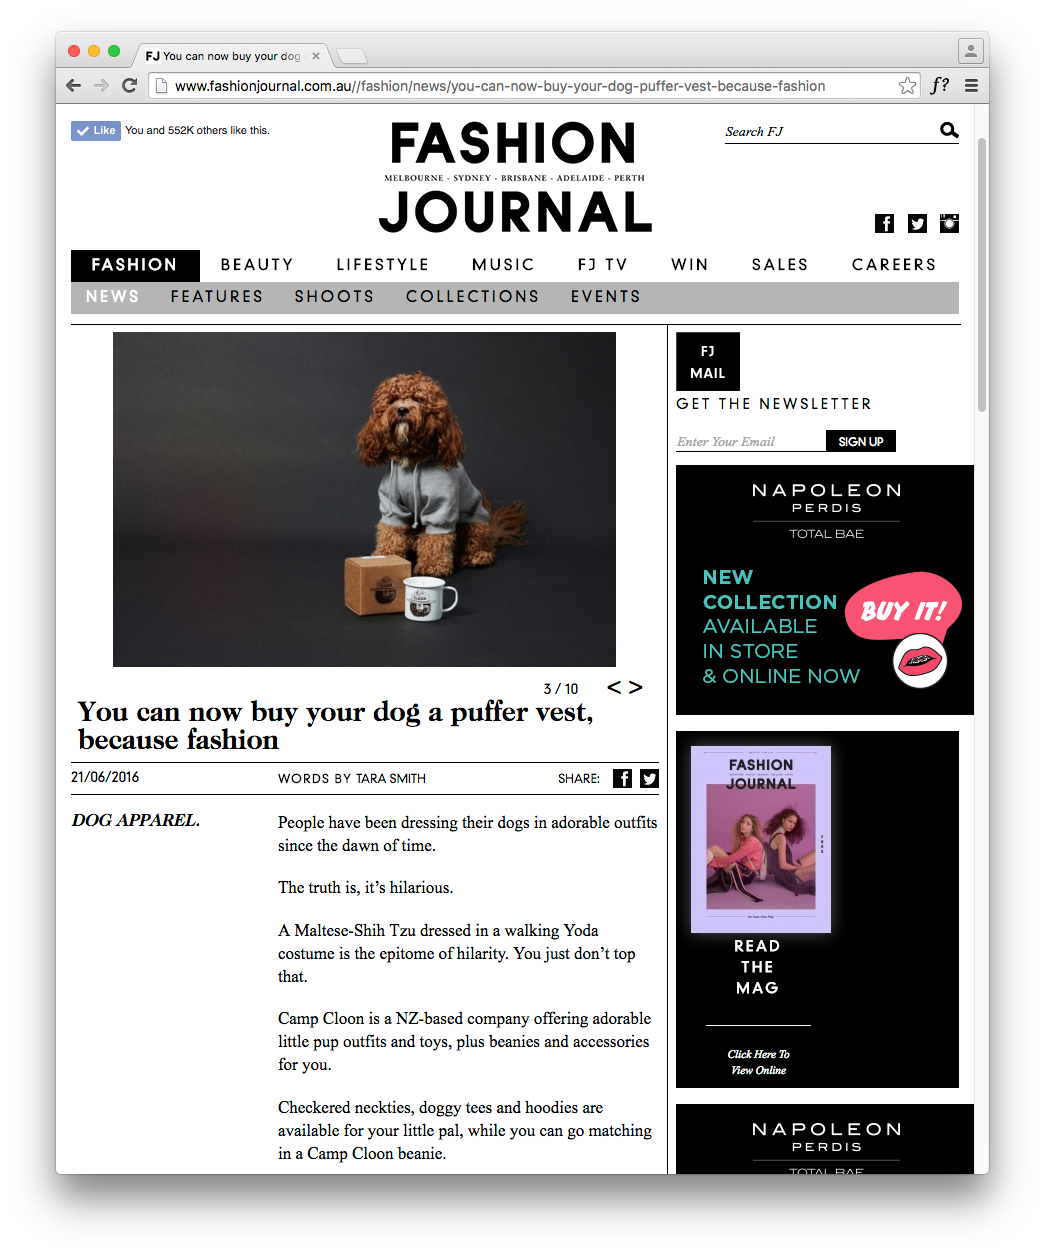 http://www.fashionjournal.com.au//fashion/news/you-can-now-buy-your-dog-puffer-vest-because-fashion